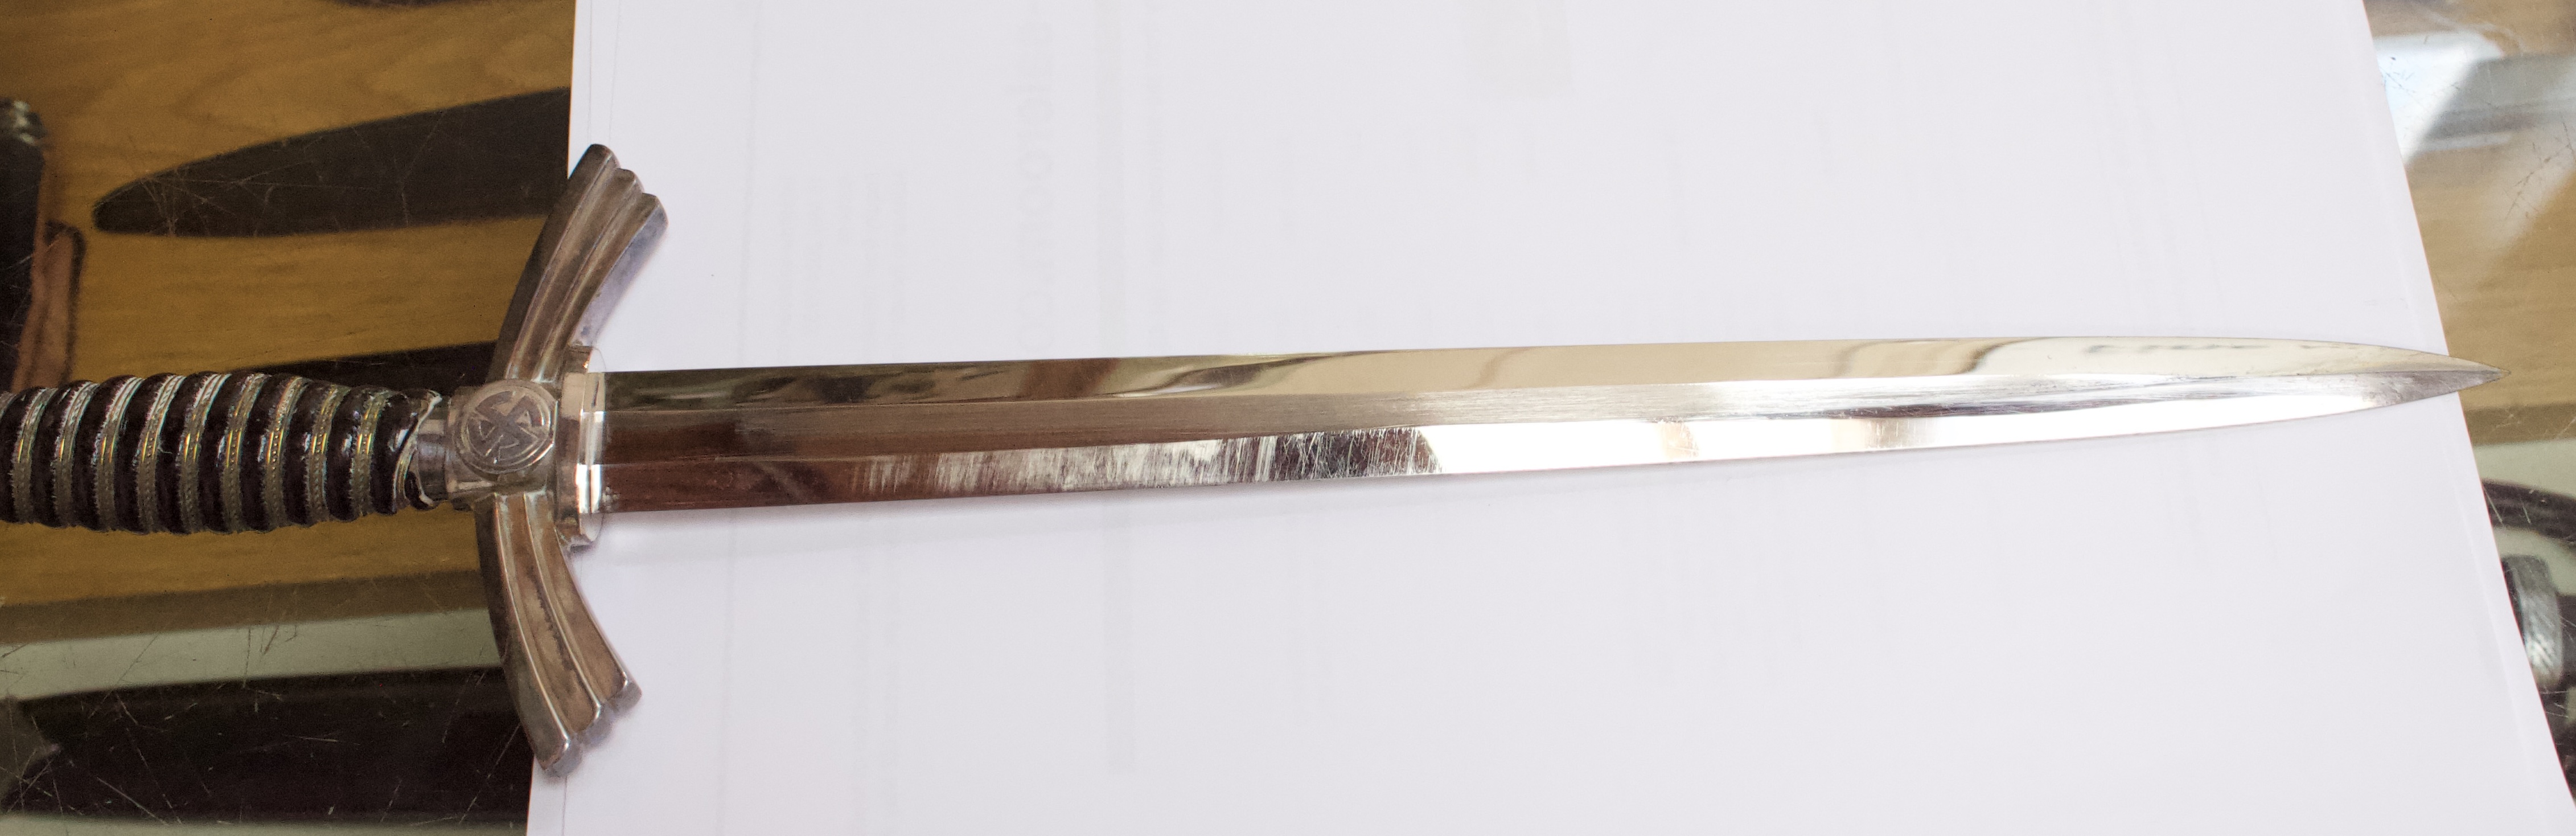 A First Pattern Luftwaffe Ceremonial Dagger, with scabbard and hanger chain, blade flat engraved - Image 7 of 11